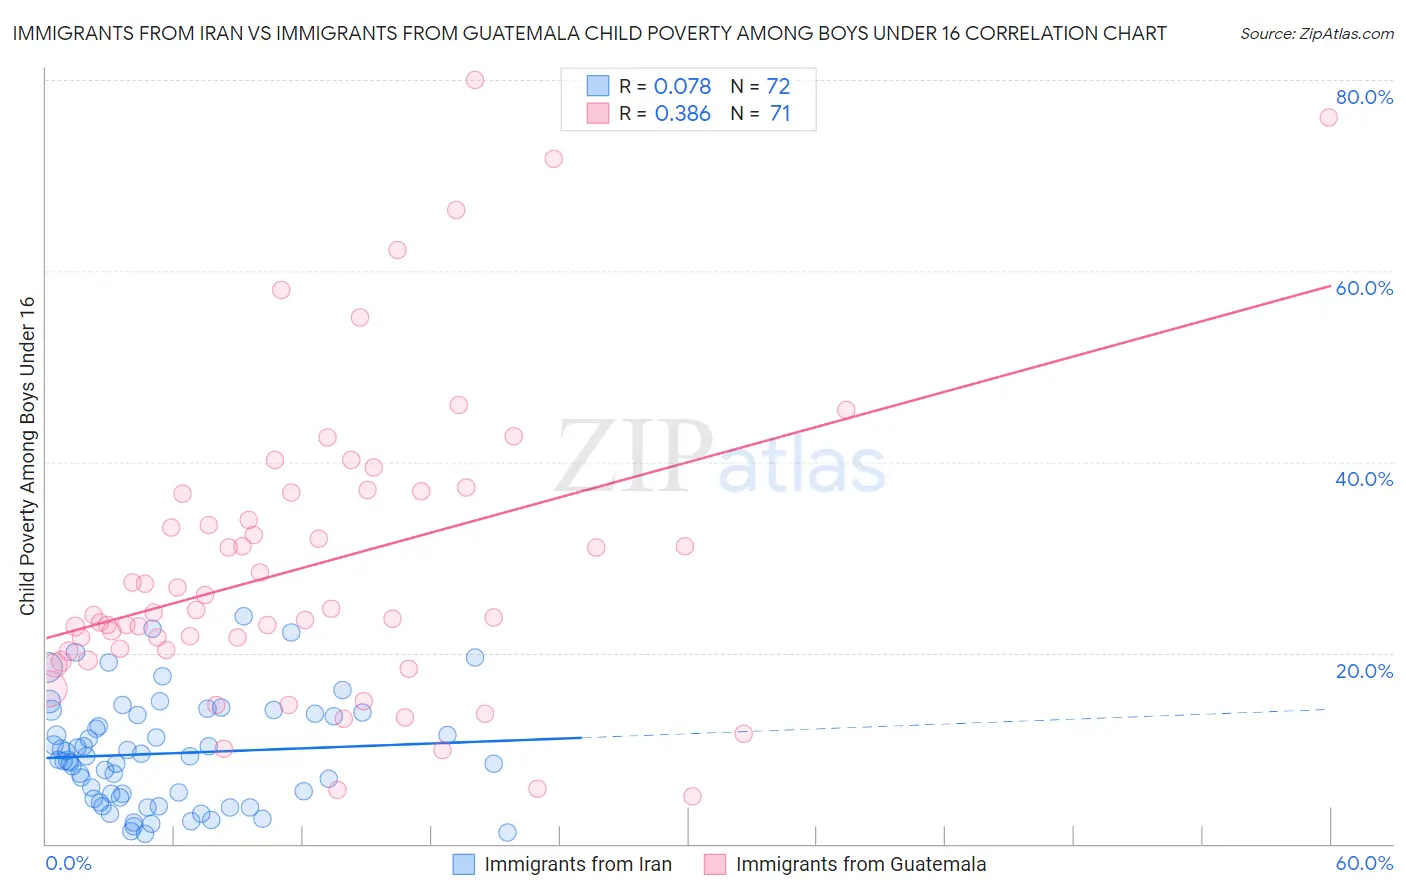 Immigrants from Iran vs Immigrants from Guatemala Child Poverty Among Boys Under 16